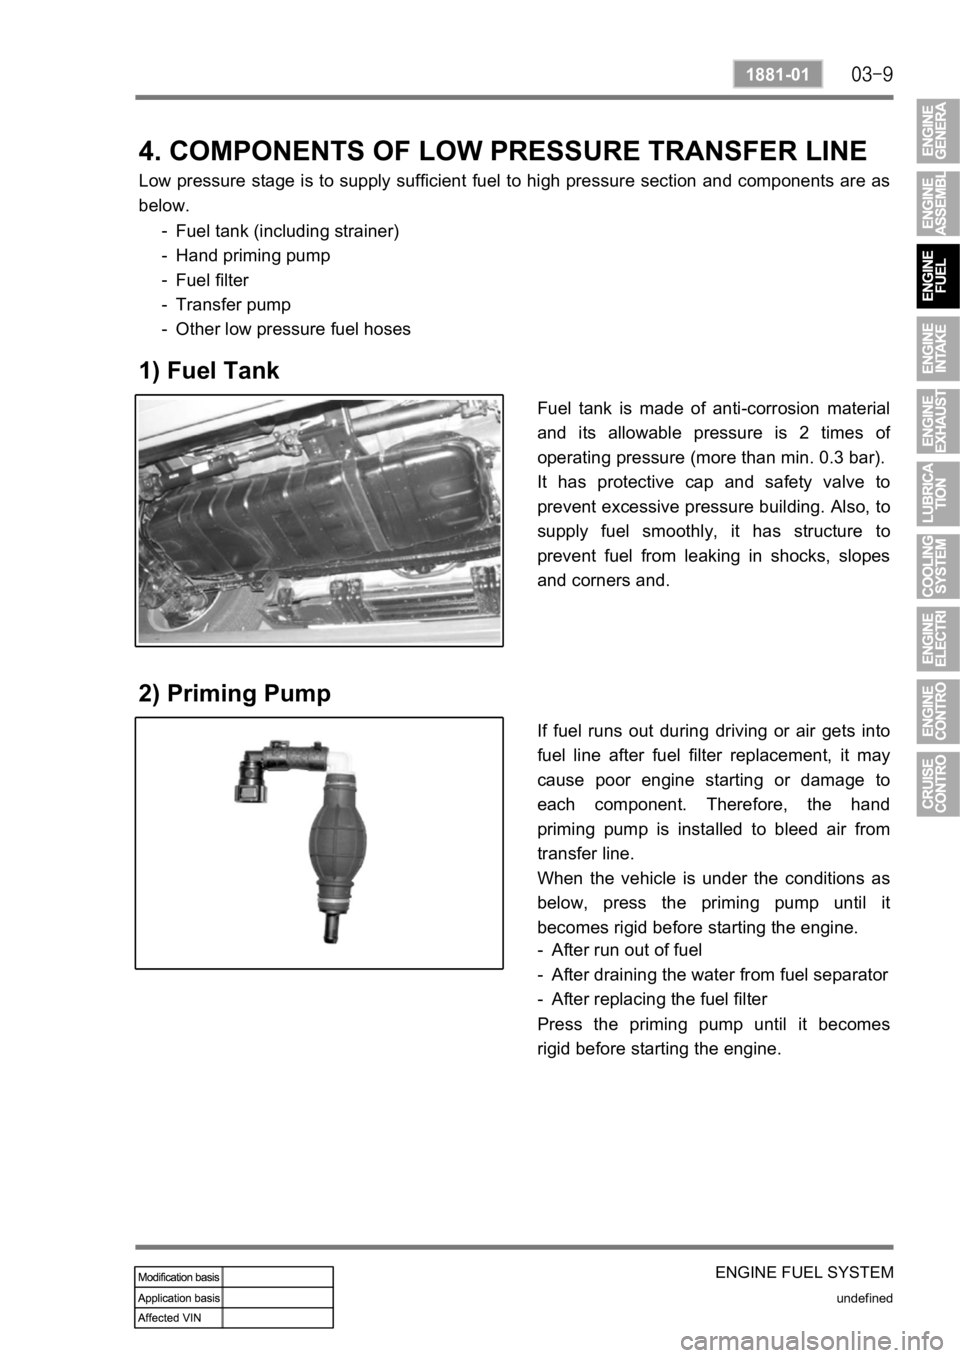 SSANGYONG KYRON 2008  Service Manual ENGINE FUEL SYSTEM
undefined
1881-01
4. COMPONENTS OF LOW PRESSURE TRANSFER LINE
Low pressure stage is to supply sufficient  fuel to high pressure section  and components are as 
below.
Fuel tank (inc